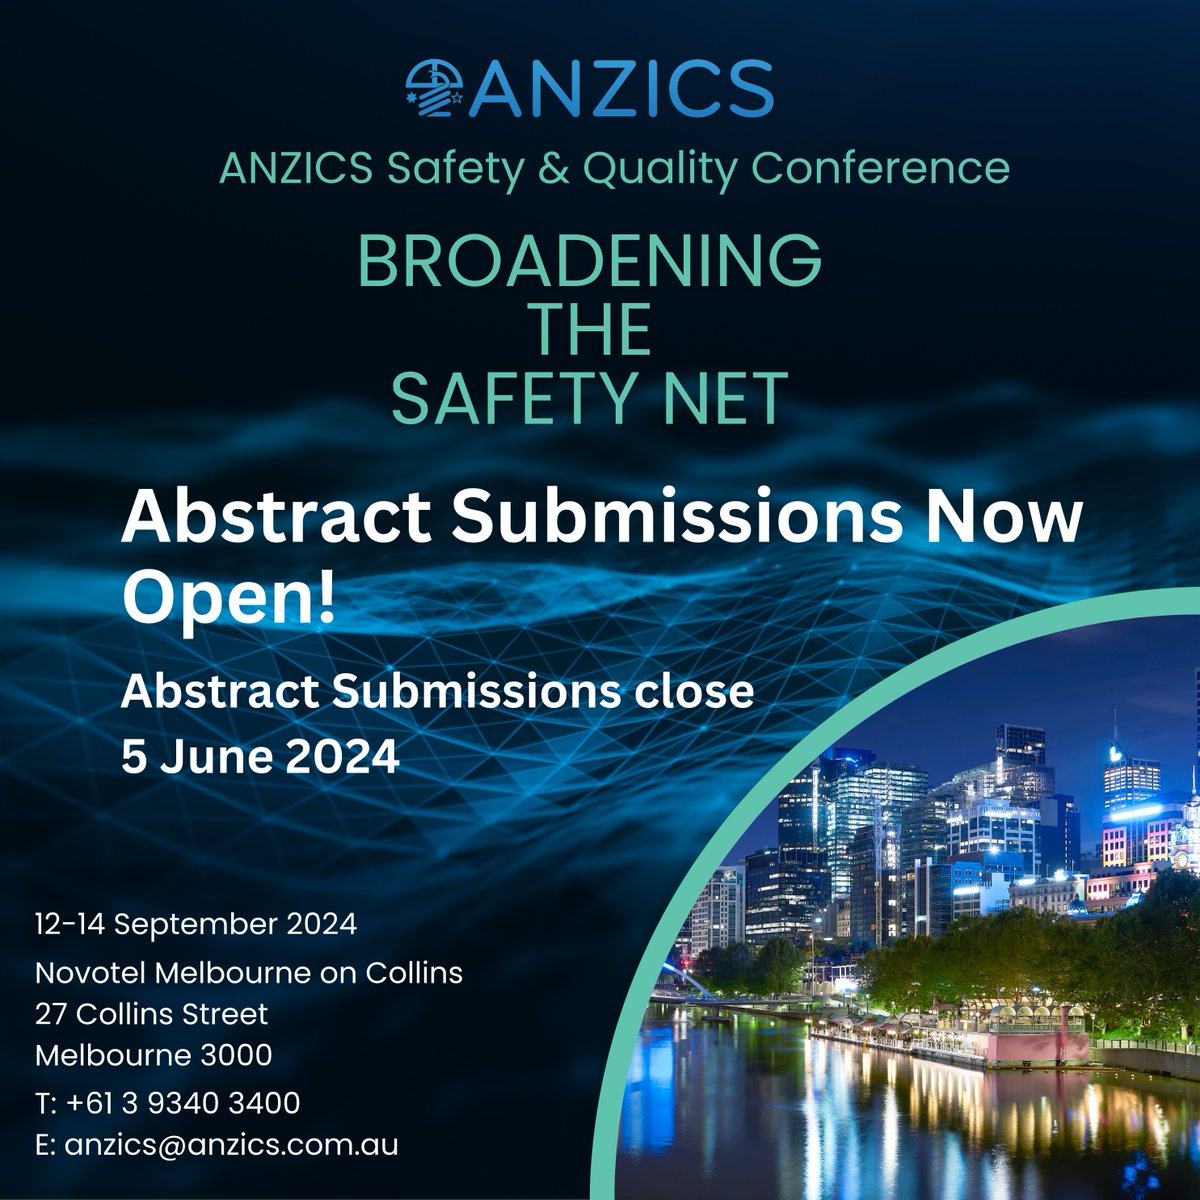 📢 Call for abstracts now open for the 2024 ANZICS Safety and Quality Conference! 🎉 Abstract Guidelines available on our website: Click the link for more info: anzics.com.au/anzics-safety-… #ANZICS #SafetyQuality #Conference #CallForAbstracts